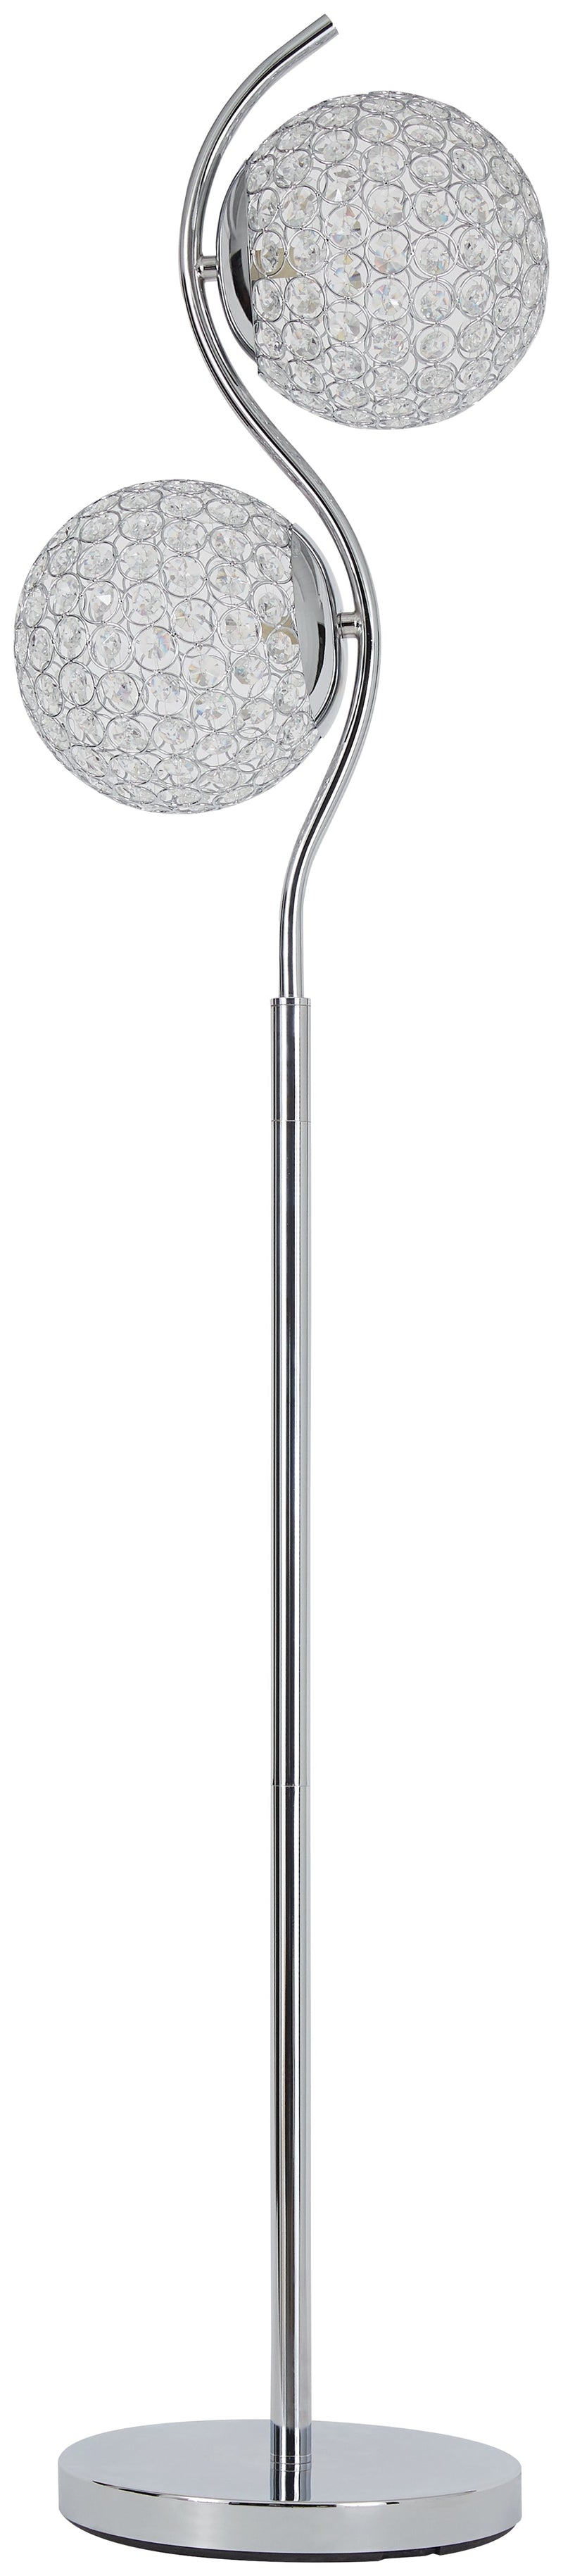 Winter Clear/silver Finish Floor Lamp